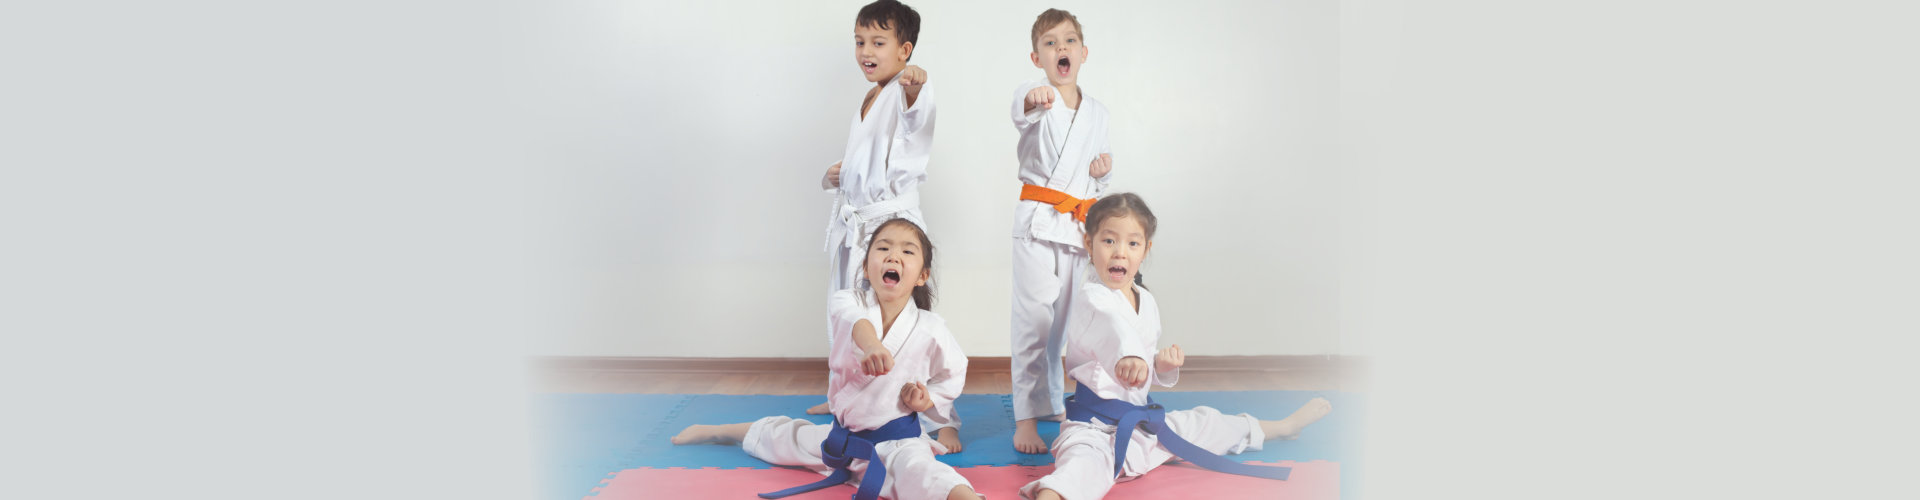 Four children demonstrate martial arts working together.